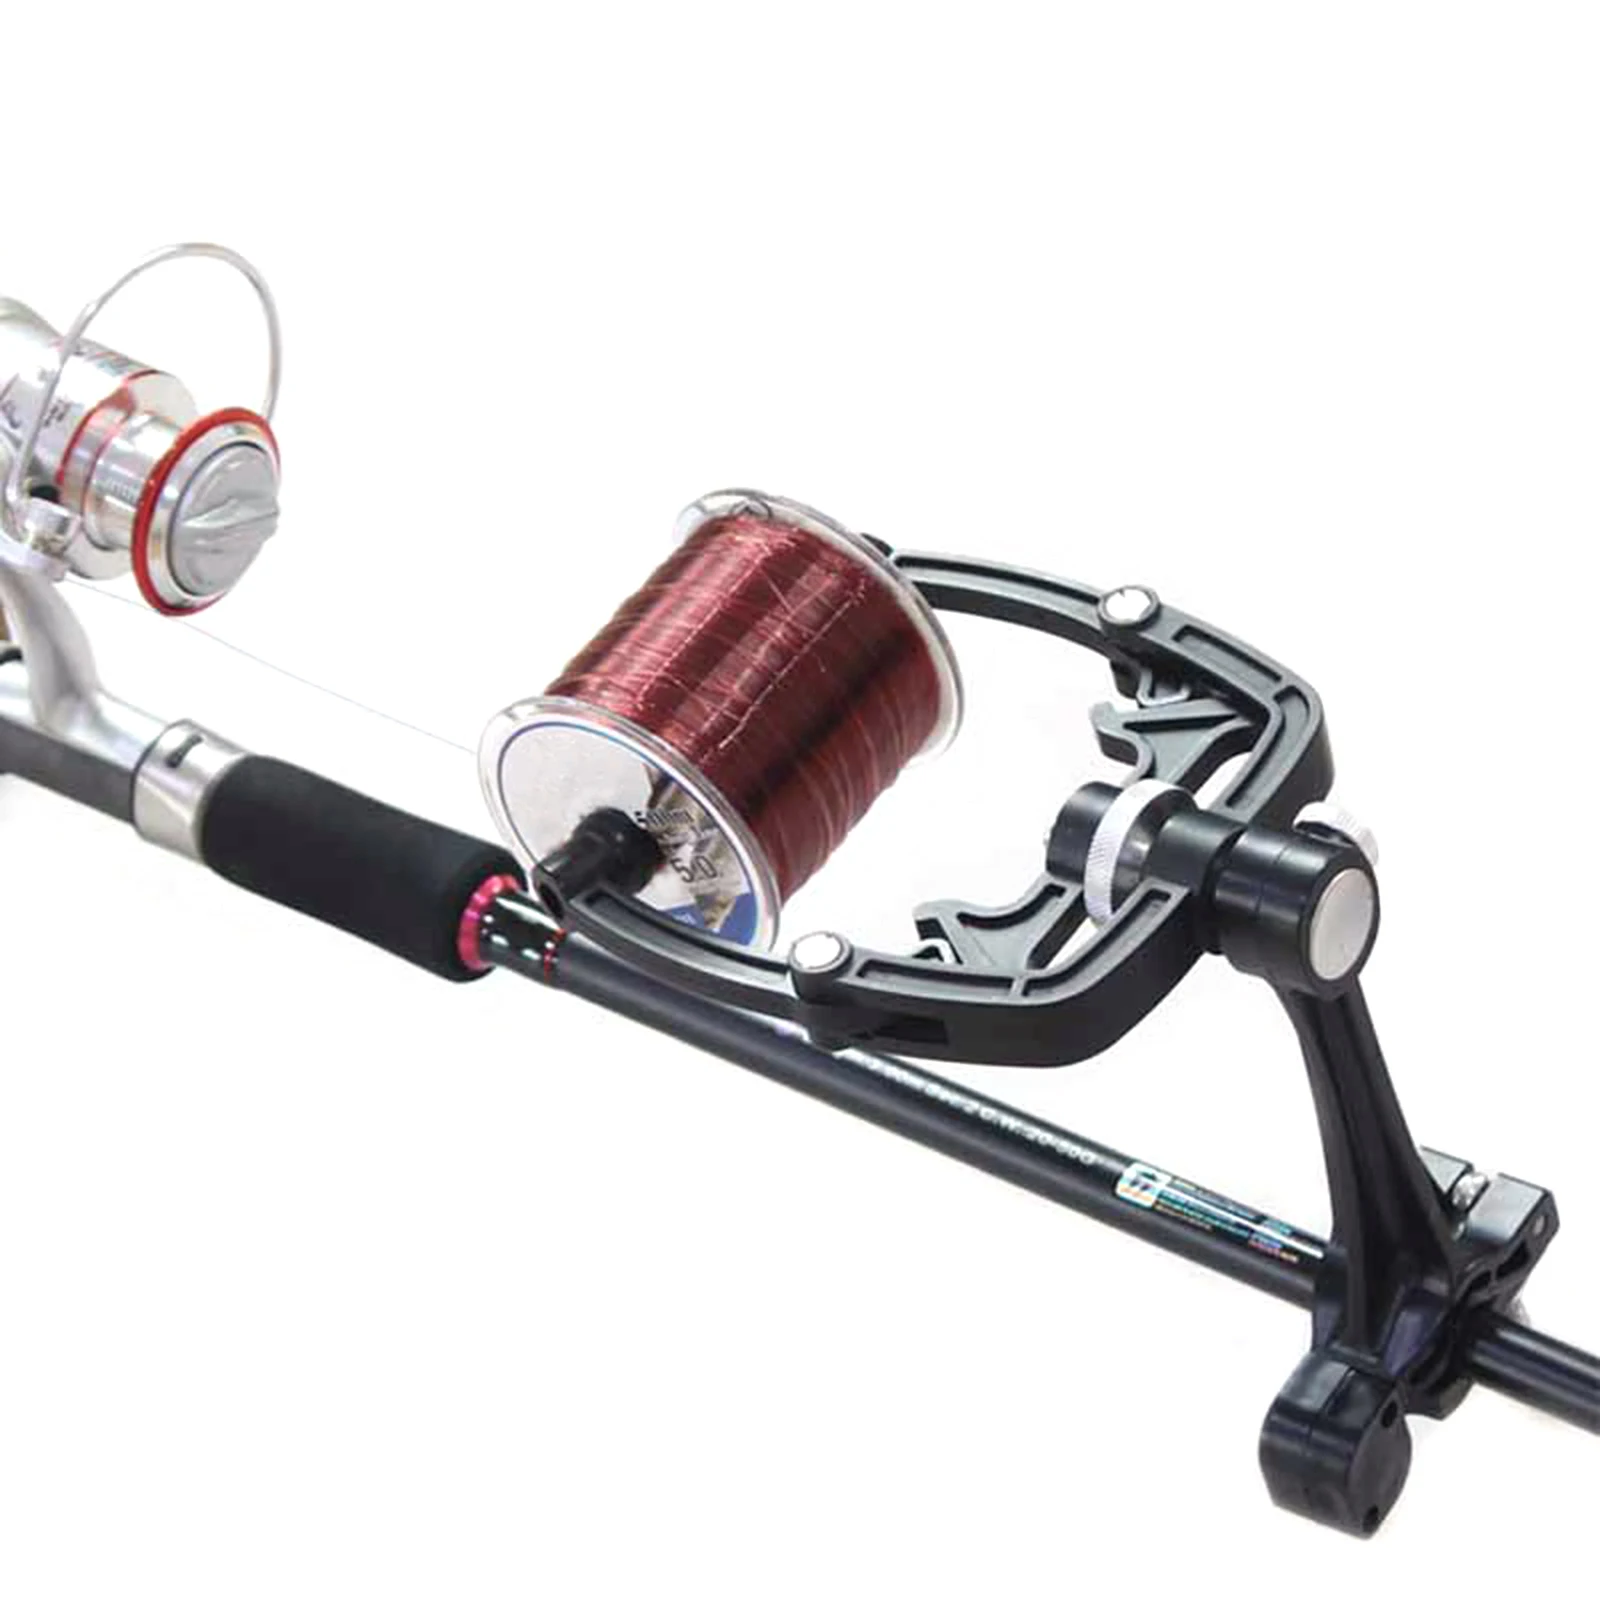 Fishing Line Spooler Winder Machine Spooling System for Spinning Fishing Reel 